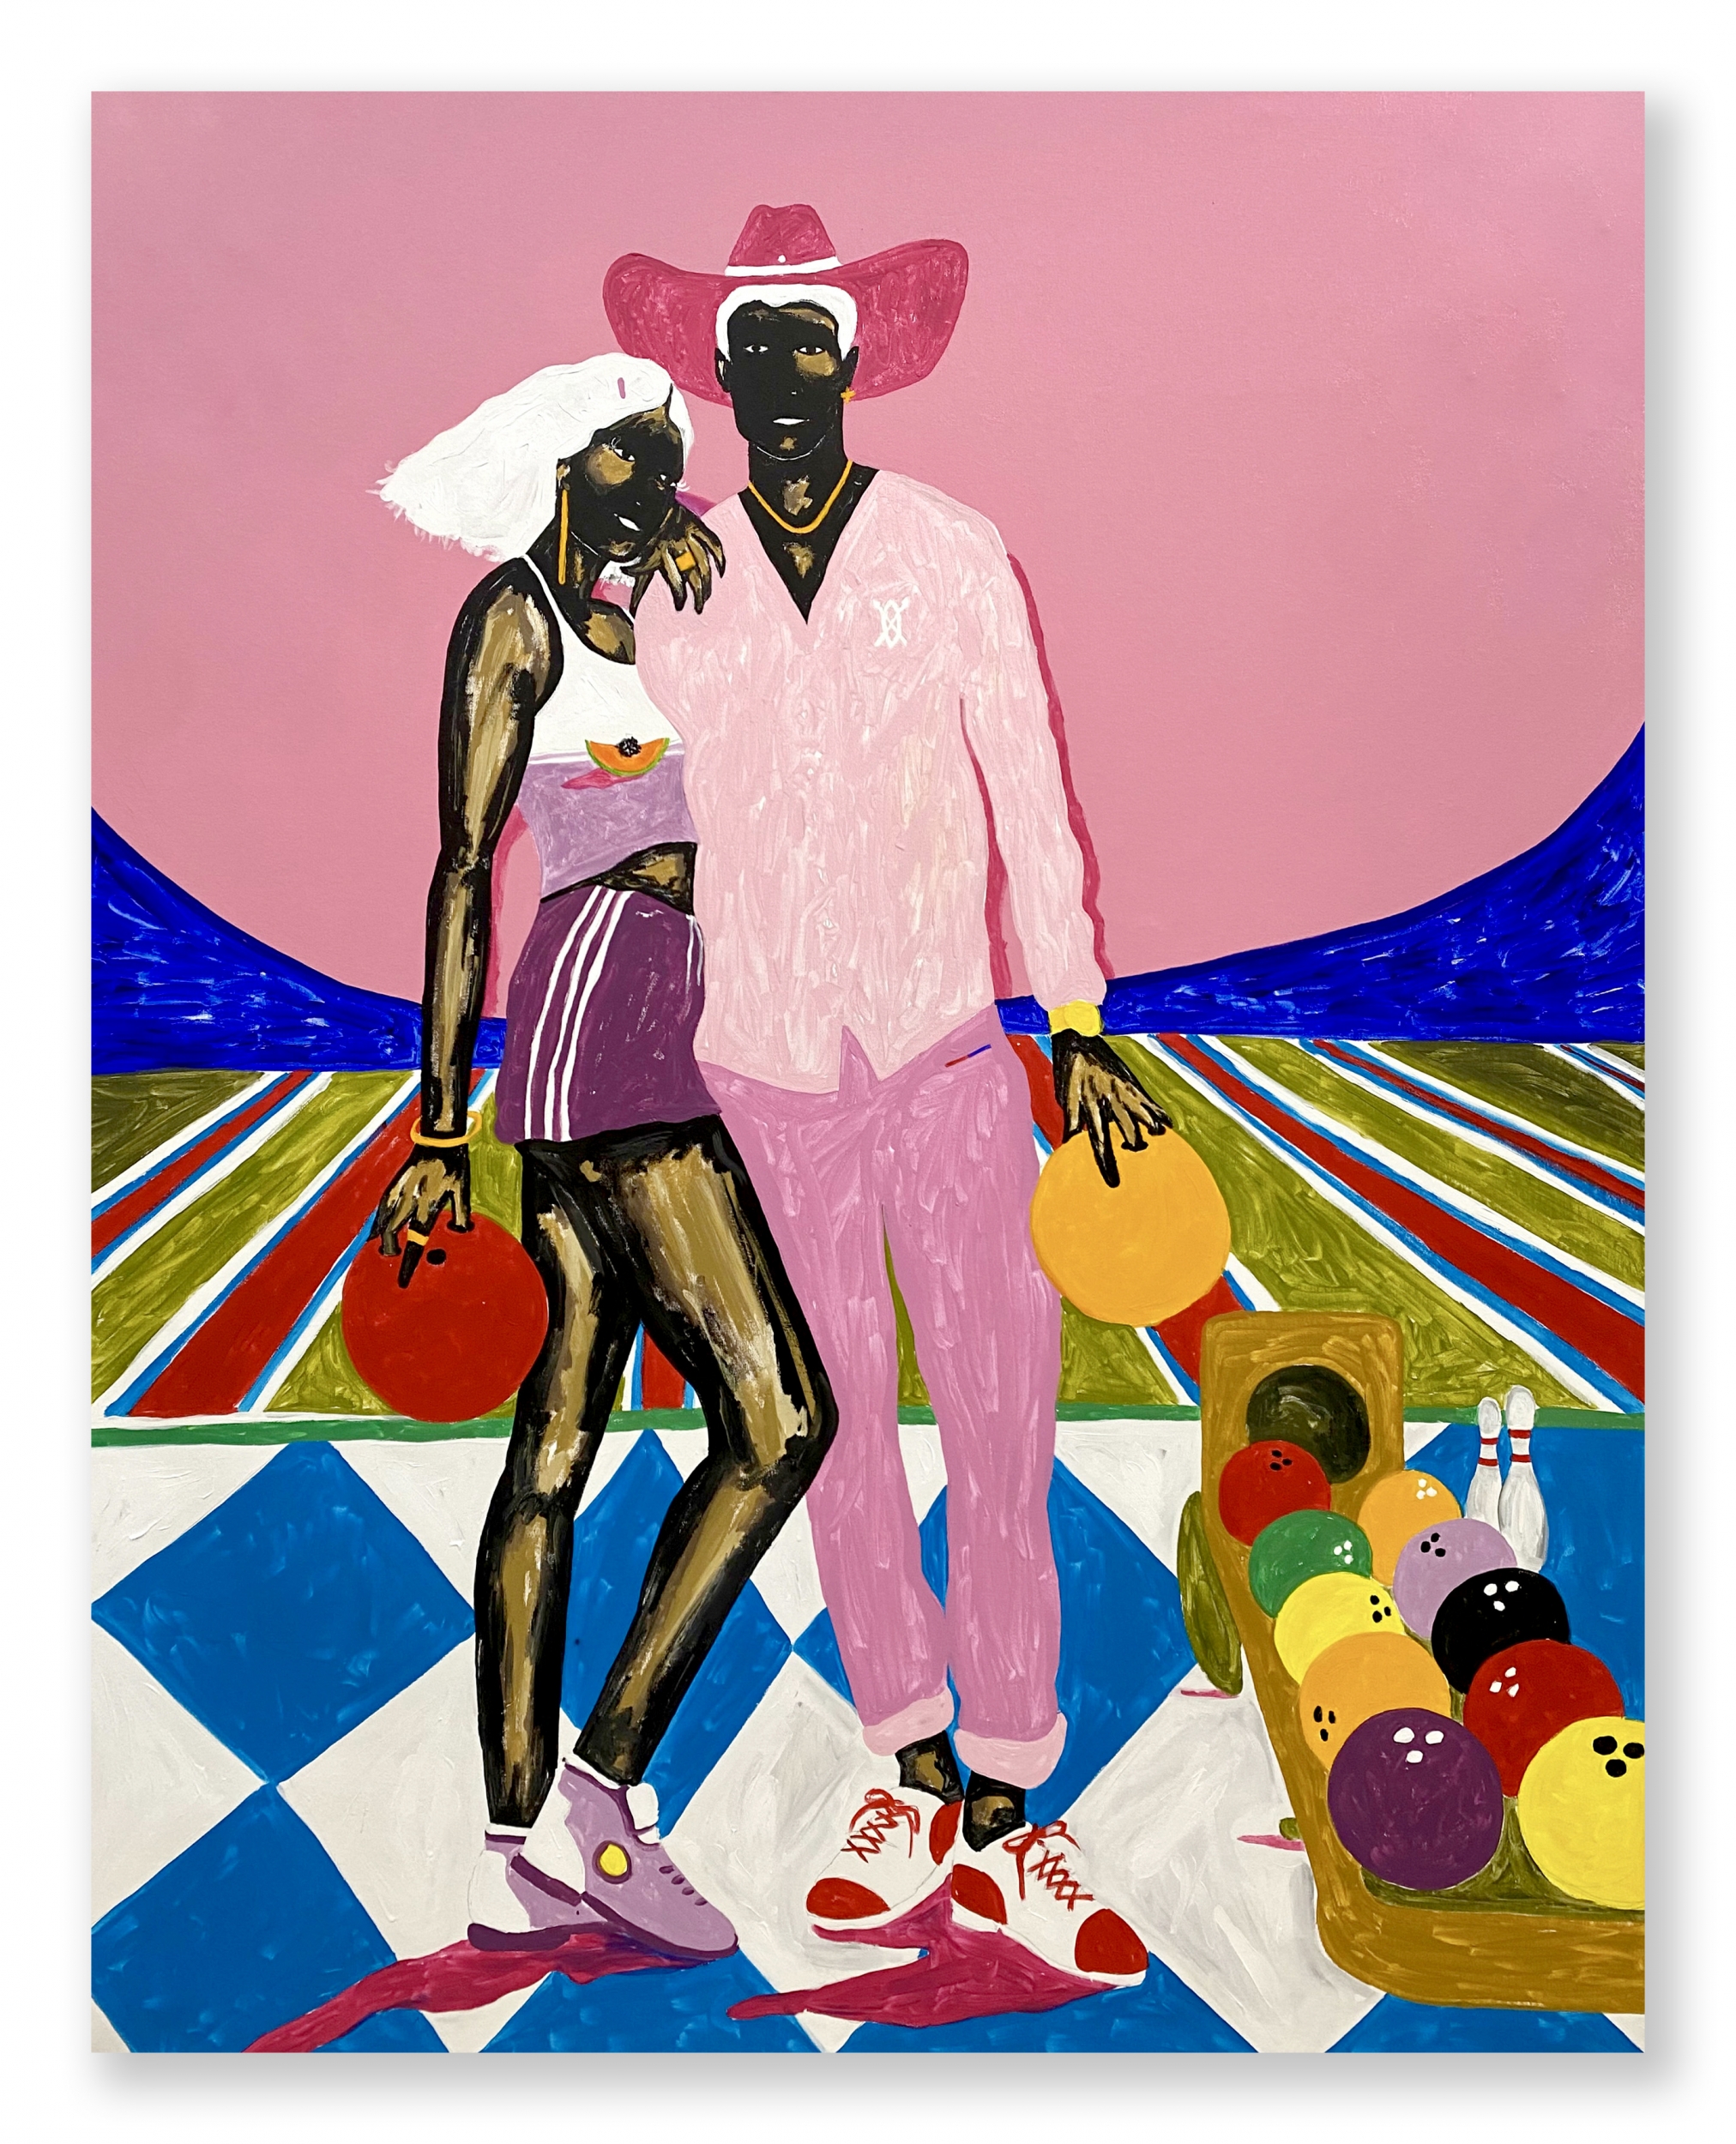 Artista Zeh Palito, Won't You Celebrate With Me, curated by Larry Ossei-Mensah (Luce Gallery, New York, NY) - Zeh Palito, Won't You Celebrate With Me, curated by Larry Ossei-Mensah (Luce Gallery, New York, NY)